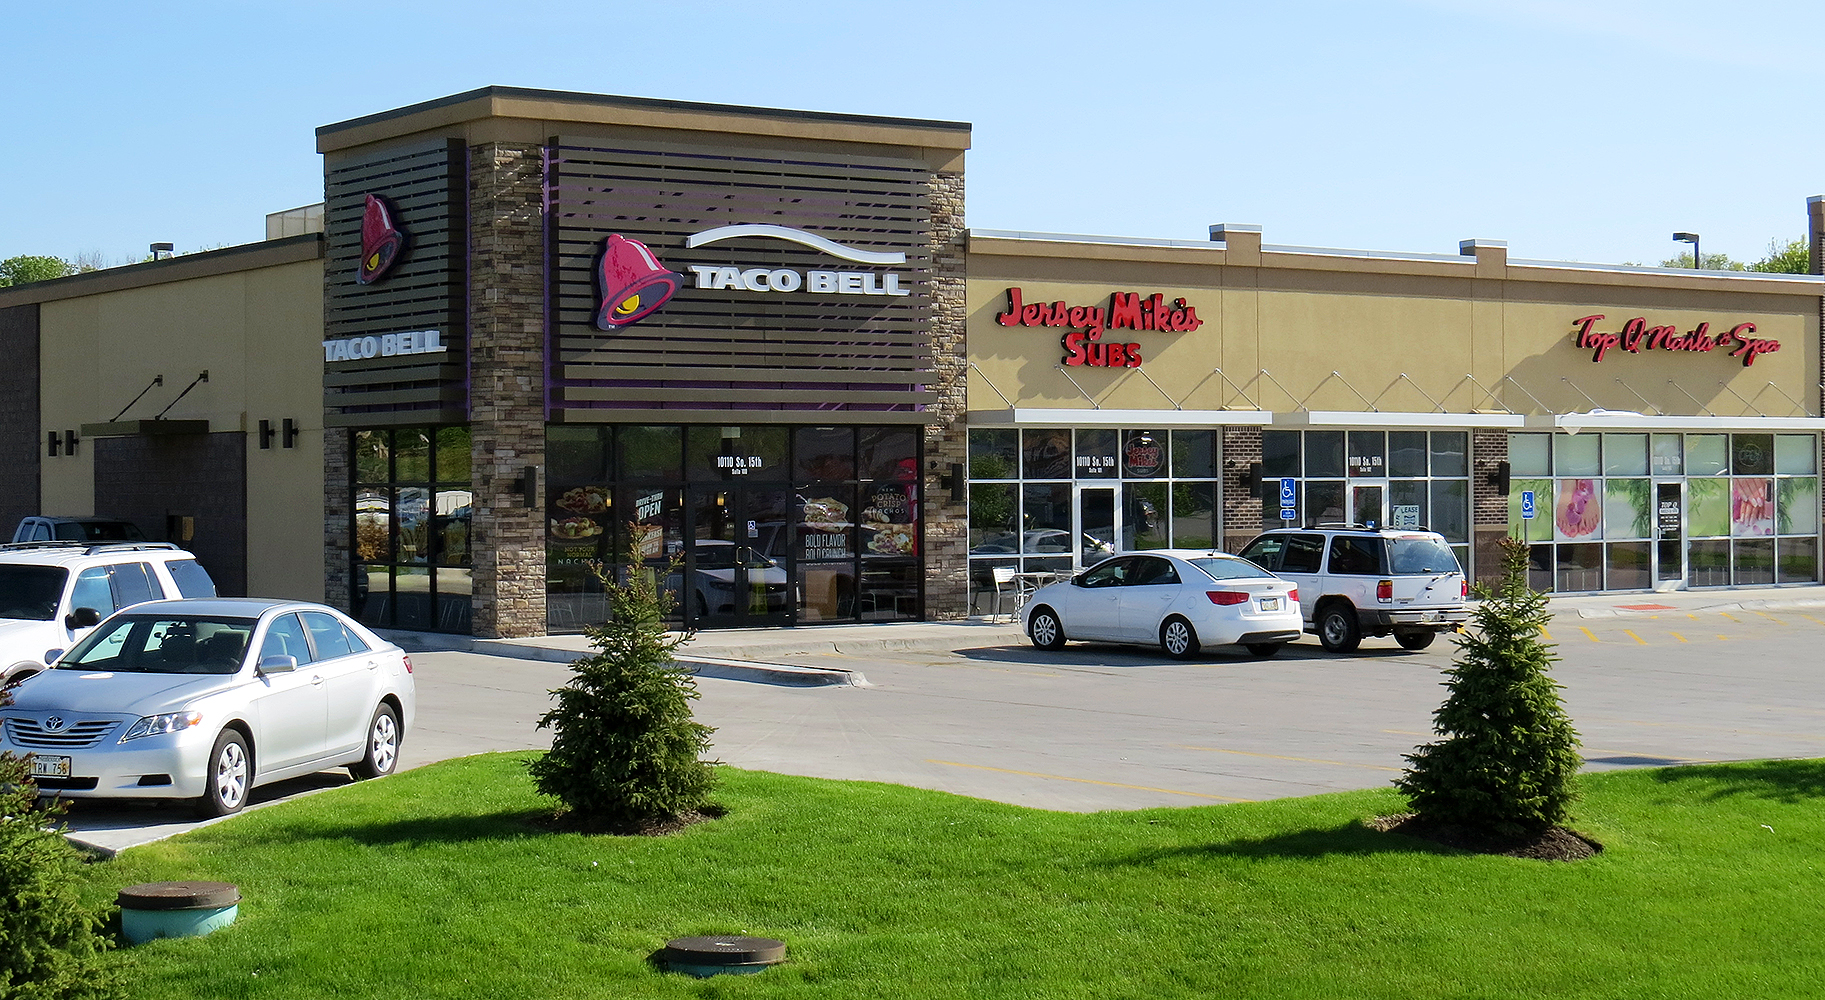 Retail Building with Taco Bell as the main anchor, Bellevue, NE